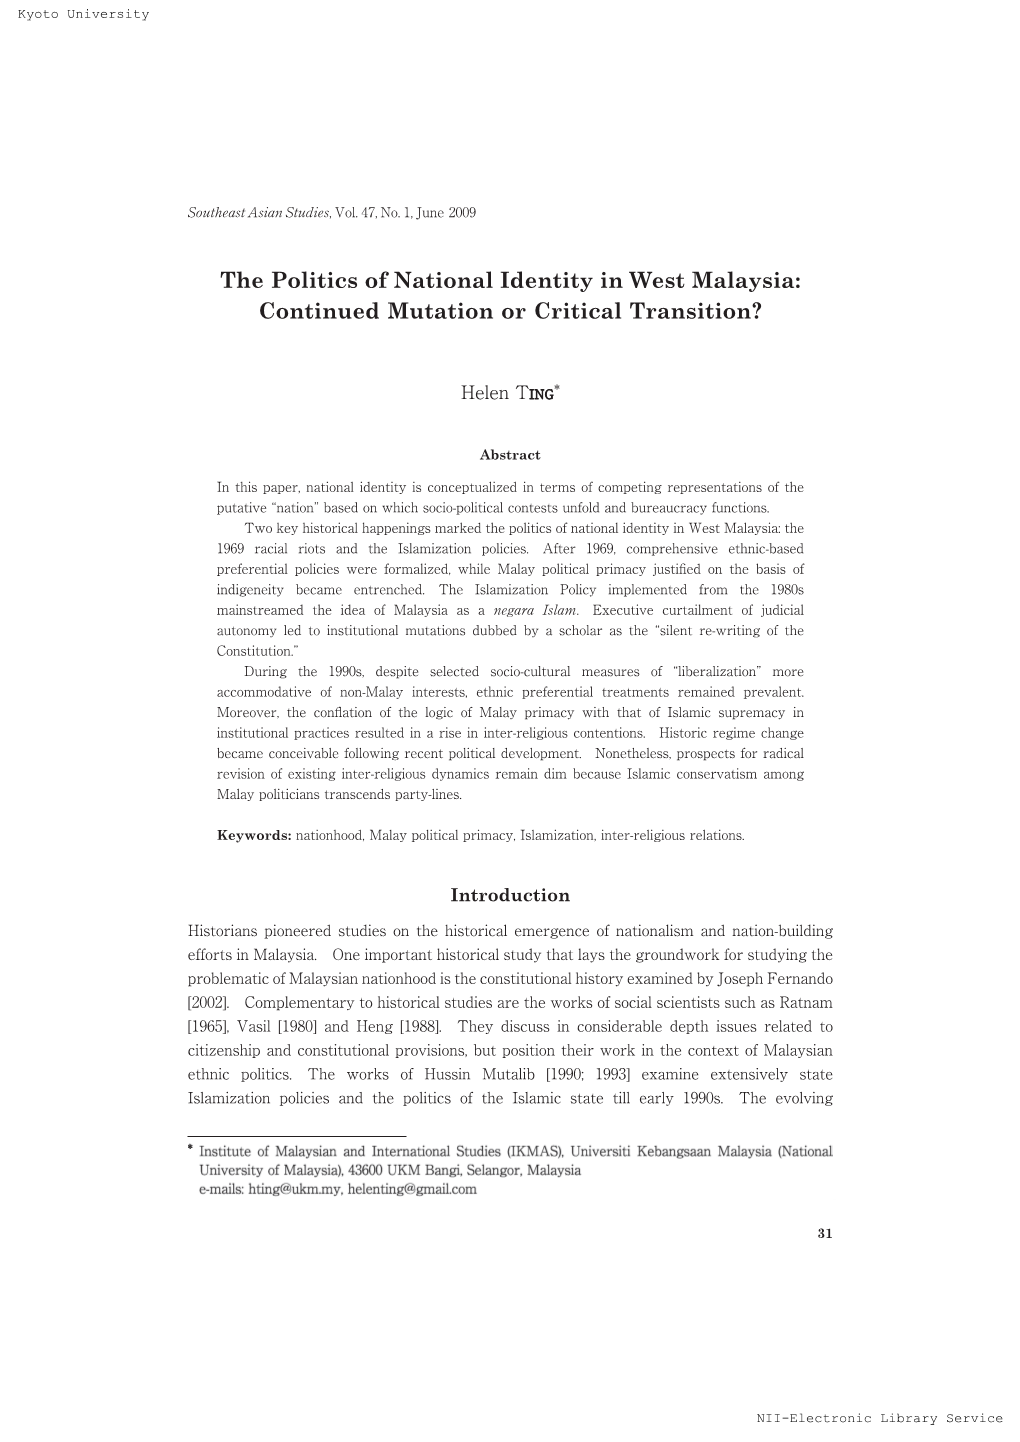 The Politics of National Identity in West Malaysia: Continued Mutation Or Critical Transition?